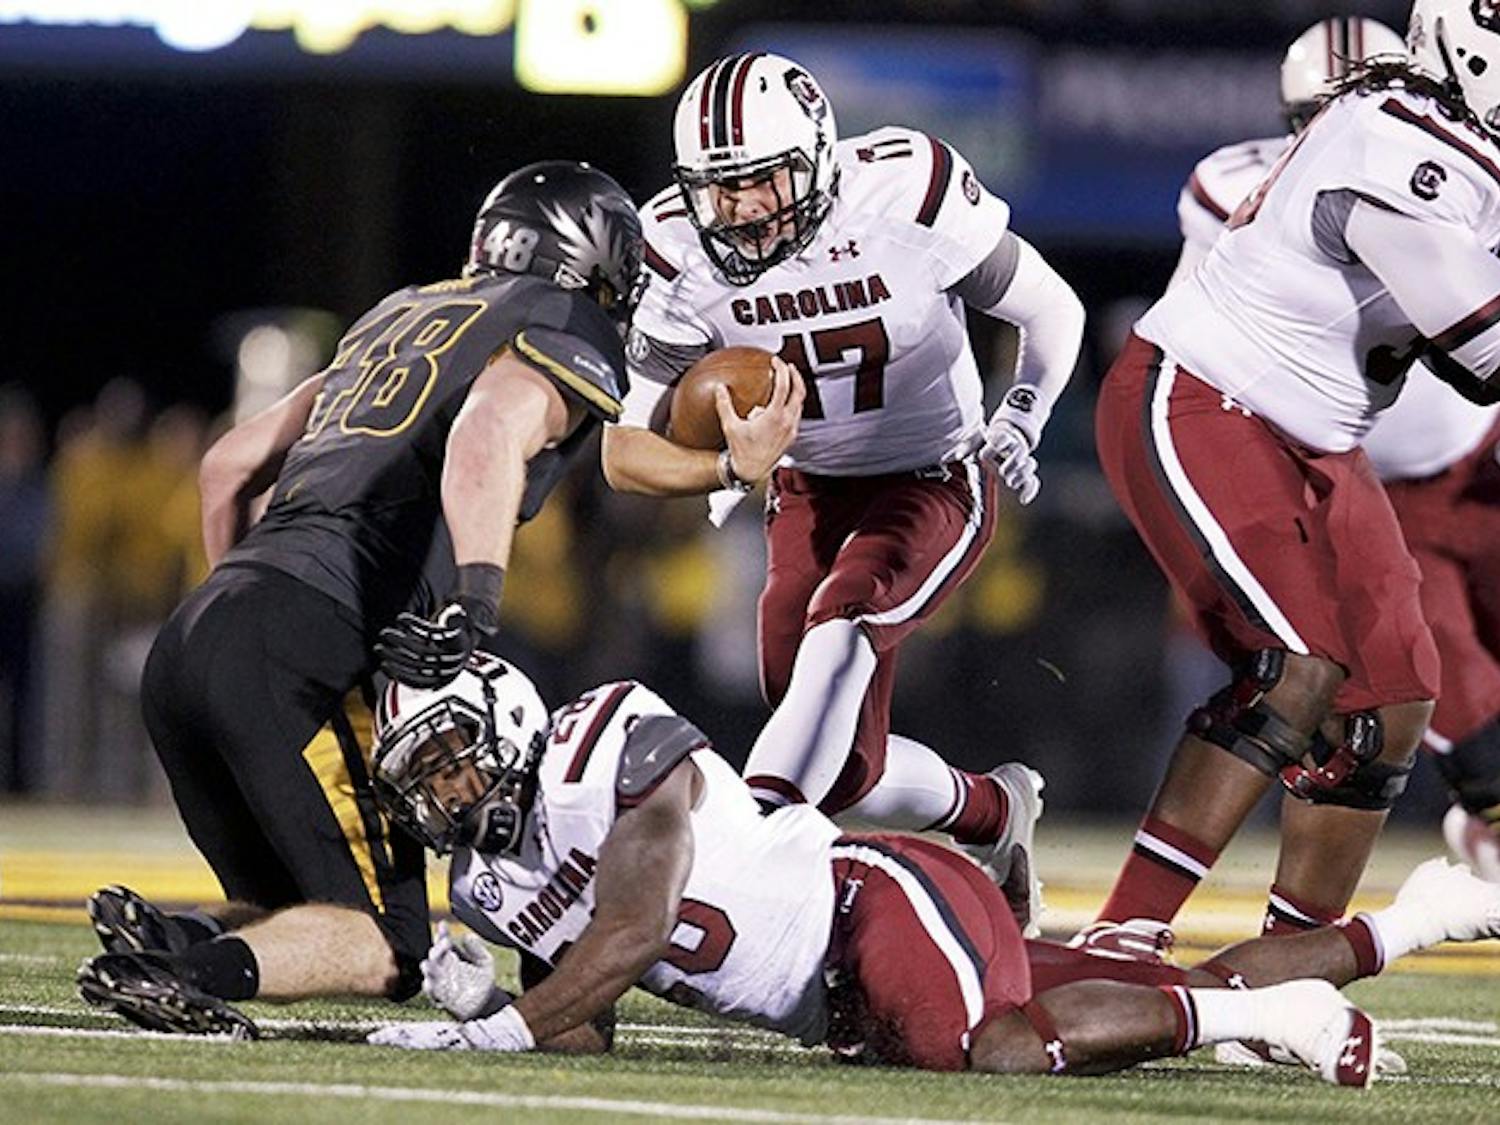 South Carolina Gamecocks quarterback Dylan Thompson (17) runs for a first down during the first quarter against Missouri at Memorial Stadium&apos;s Faurot Field in Columbia, Missouri, on Saturday, October 26, 2013. (Gerry Melendez/The State/MCT)